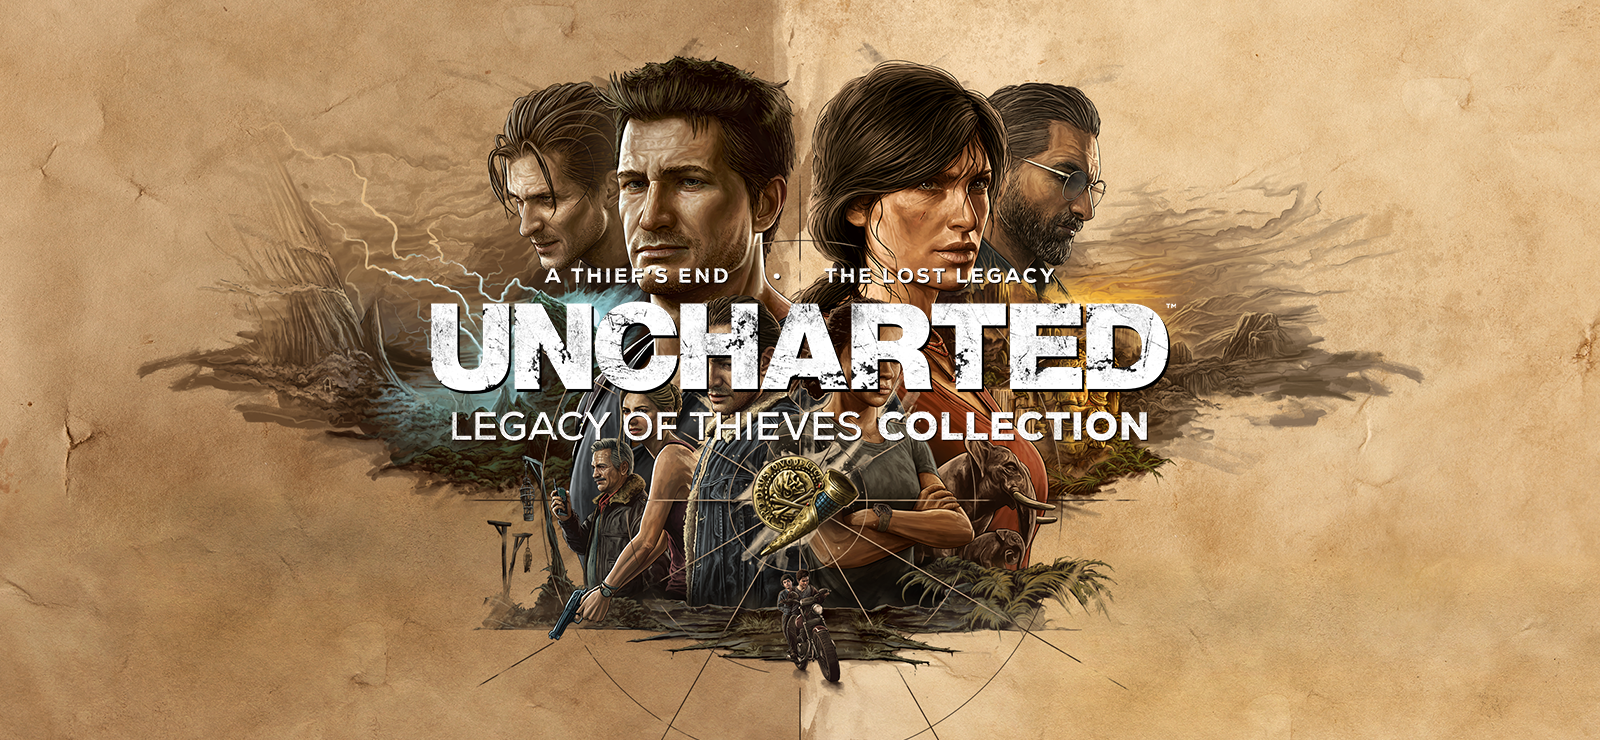 BESTSELLER - UNCHARTED™: Legacy Of Thieves Collection